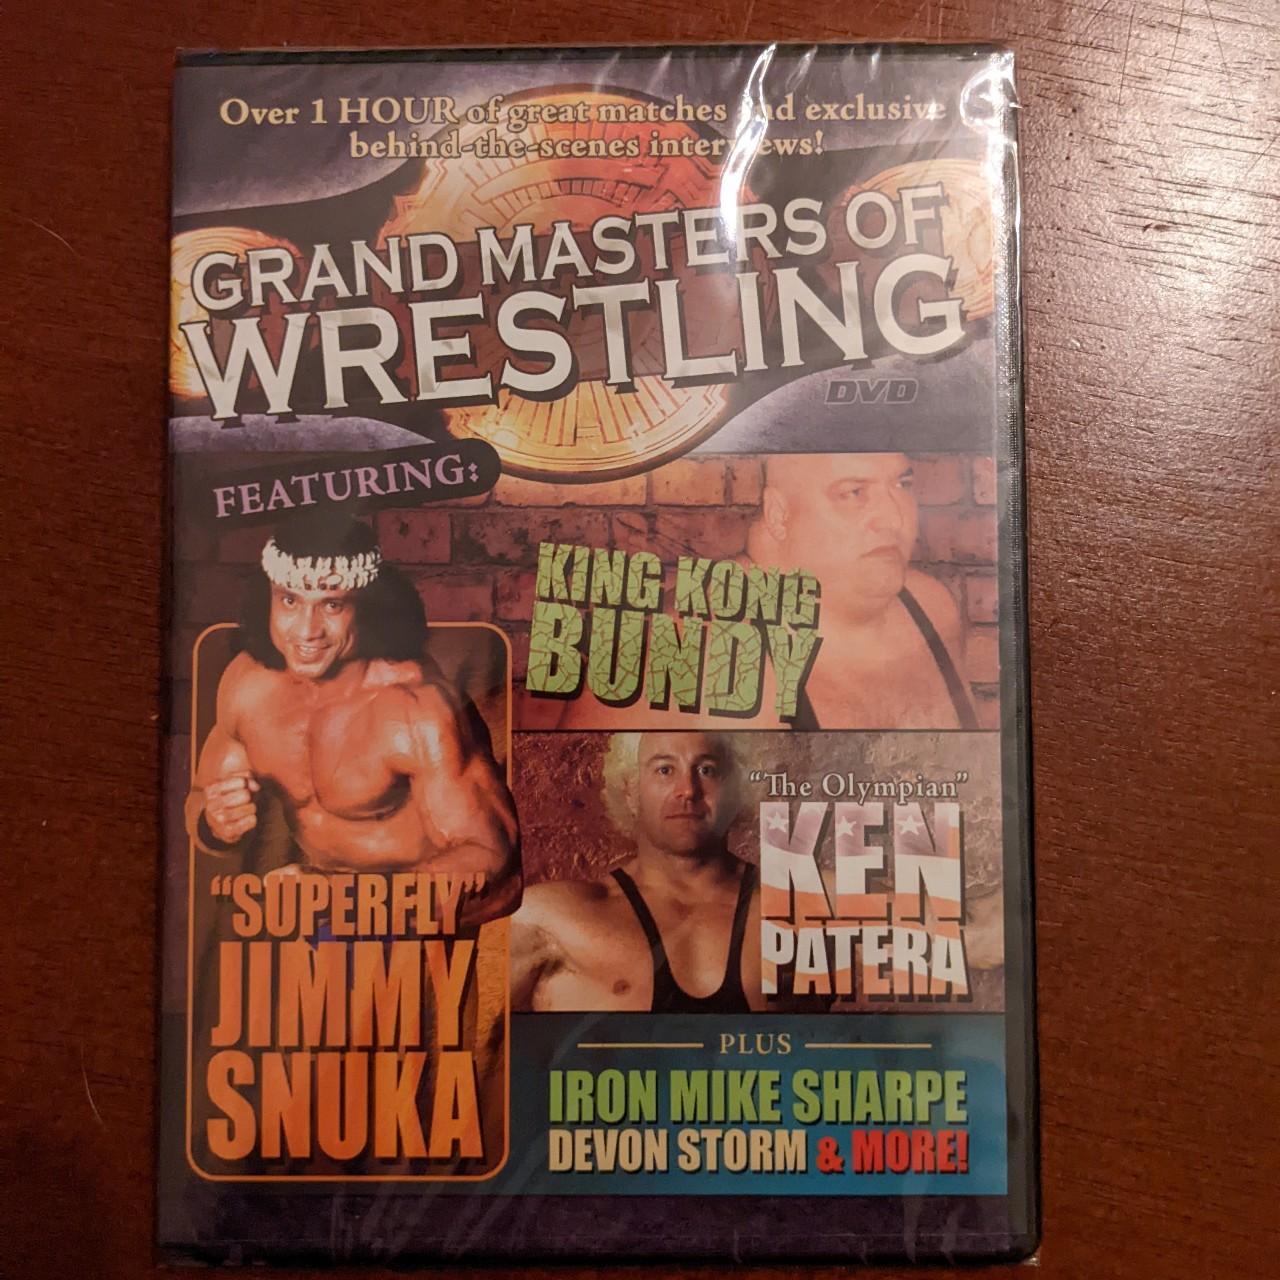 Grand Masters of Wrestling Vol 1&2 DVD Review 